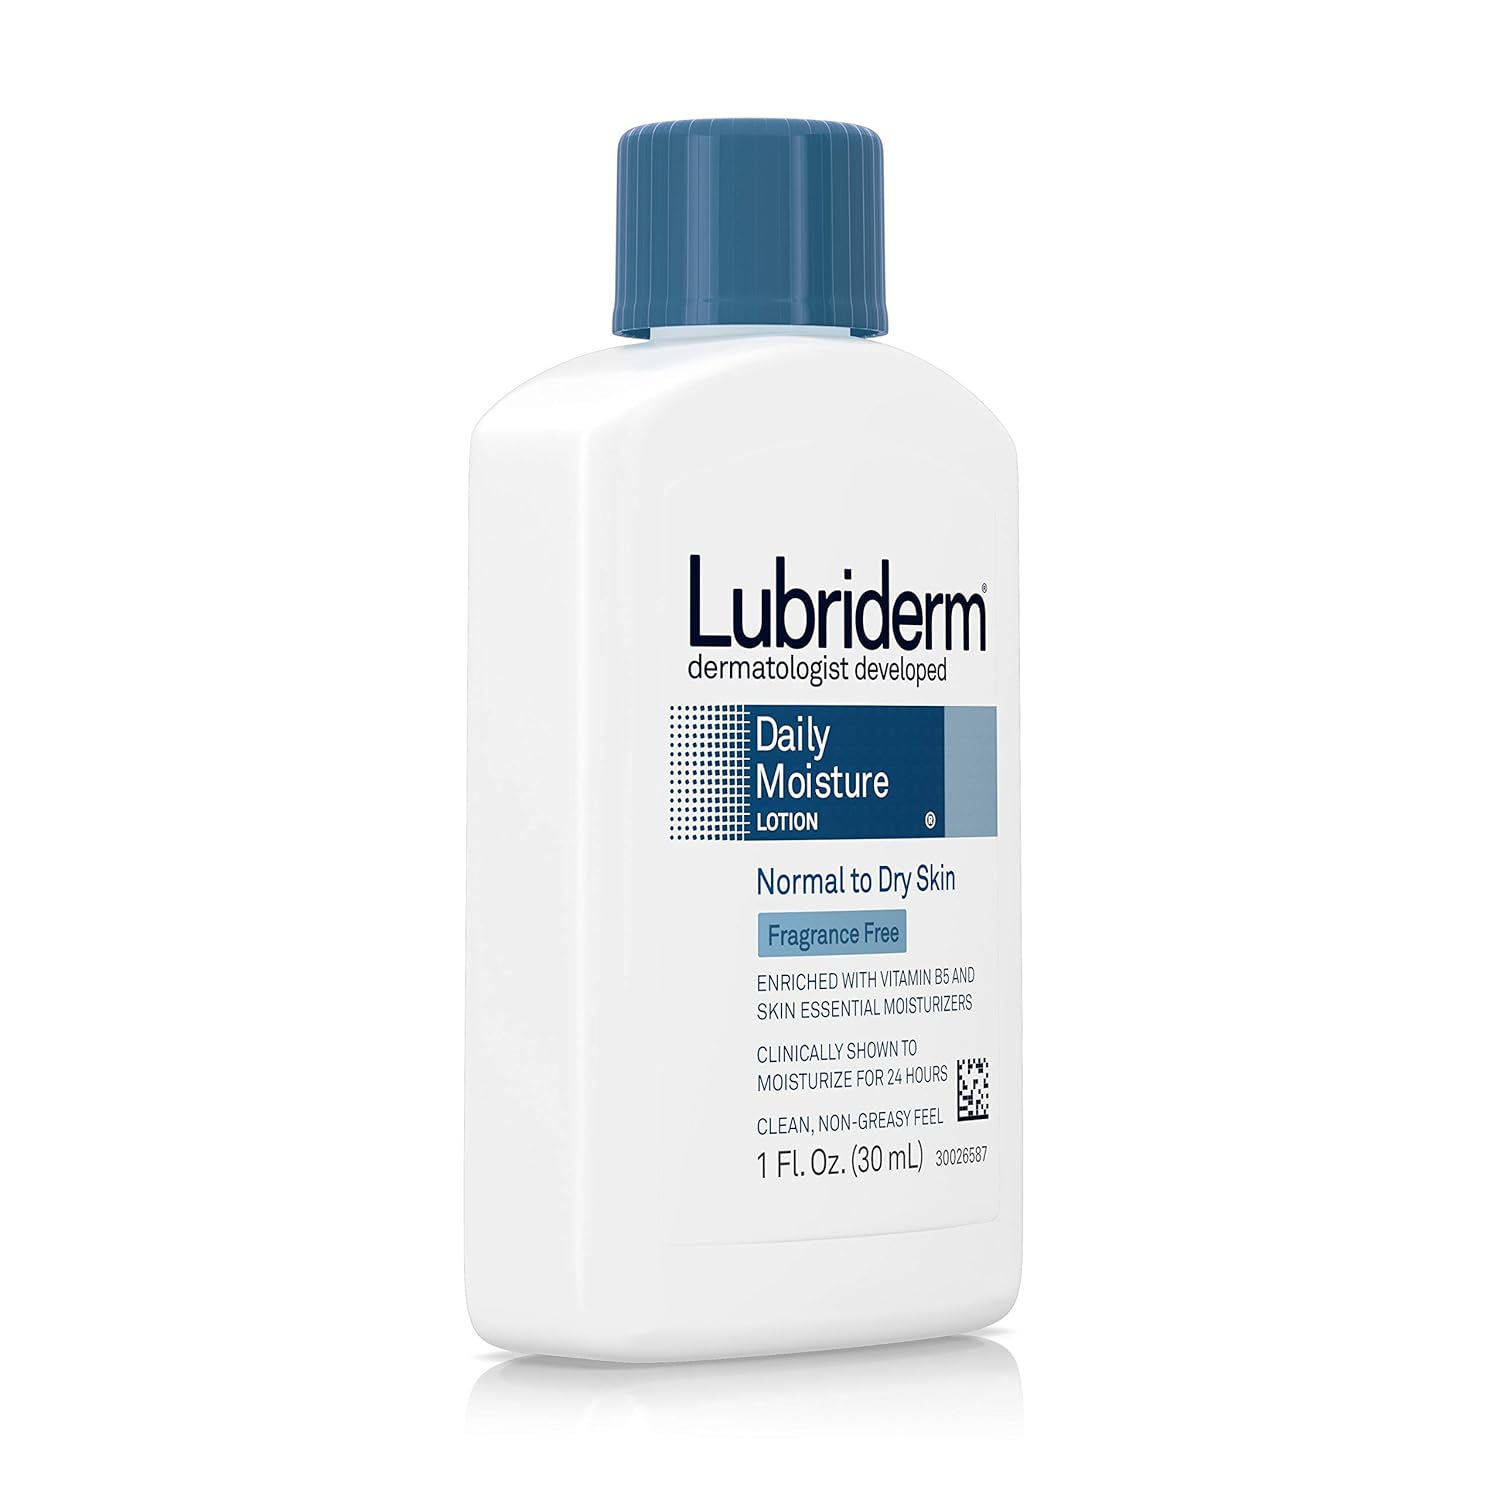 Lubriderm Daily Moisture Hydrating Unscented Body Lotion with Pro-Vitamin B5 for Normal-to-Dry Skin for Healthy-Looking Skin, Non-Greasy and Fragrance-Free Lotion, 1 fl. oz : Beauty & Personal Care